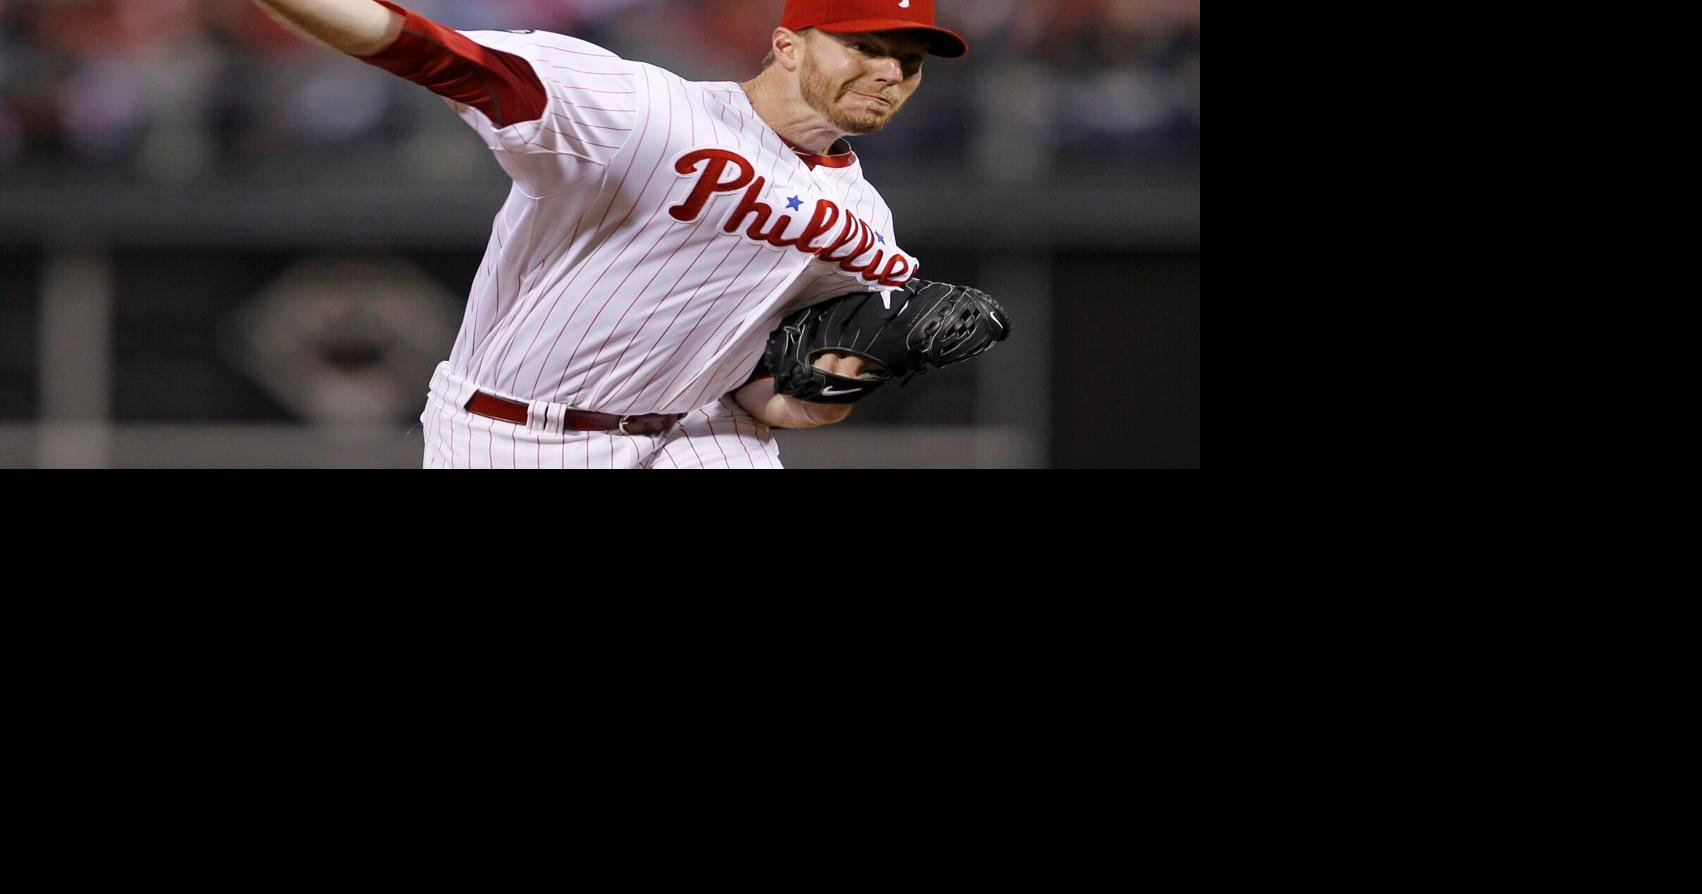 All-Star ace Roy Halladay elected to Baseball Hall of Fame - WHYY